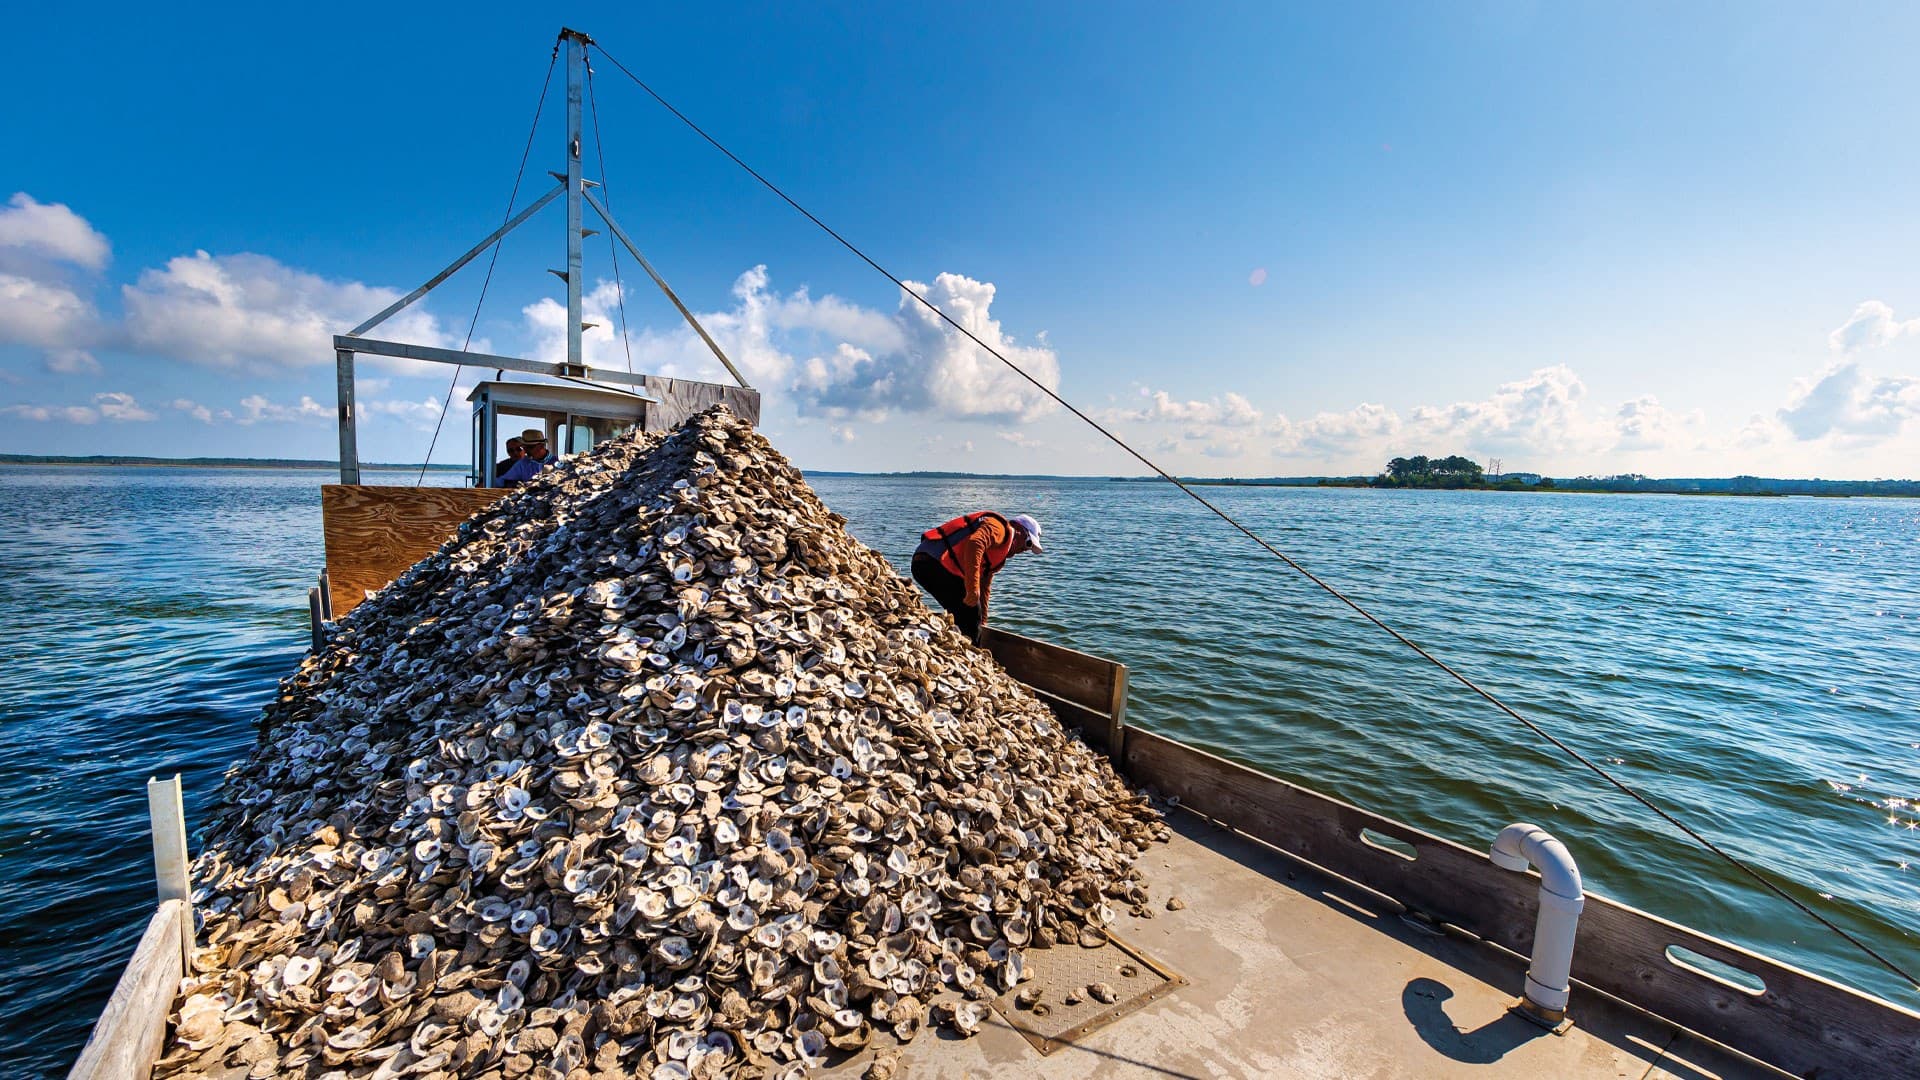 Pile of oyster shells on boat